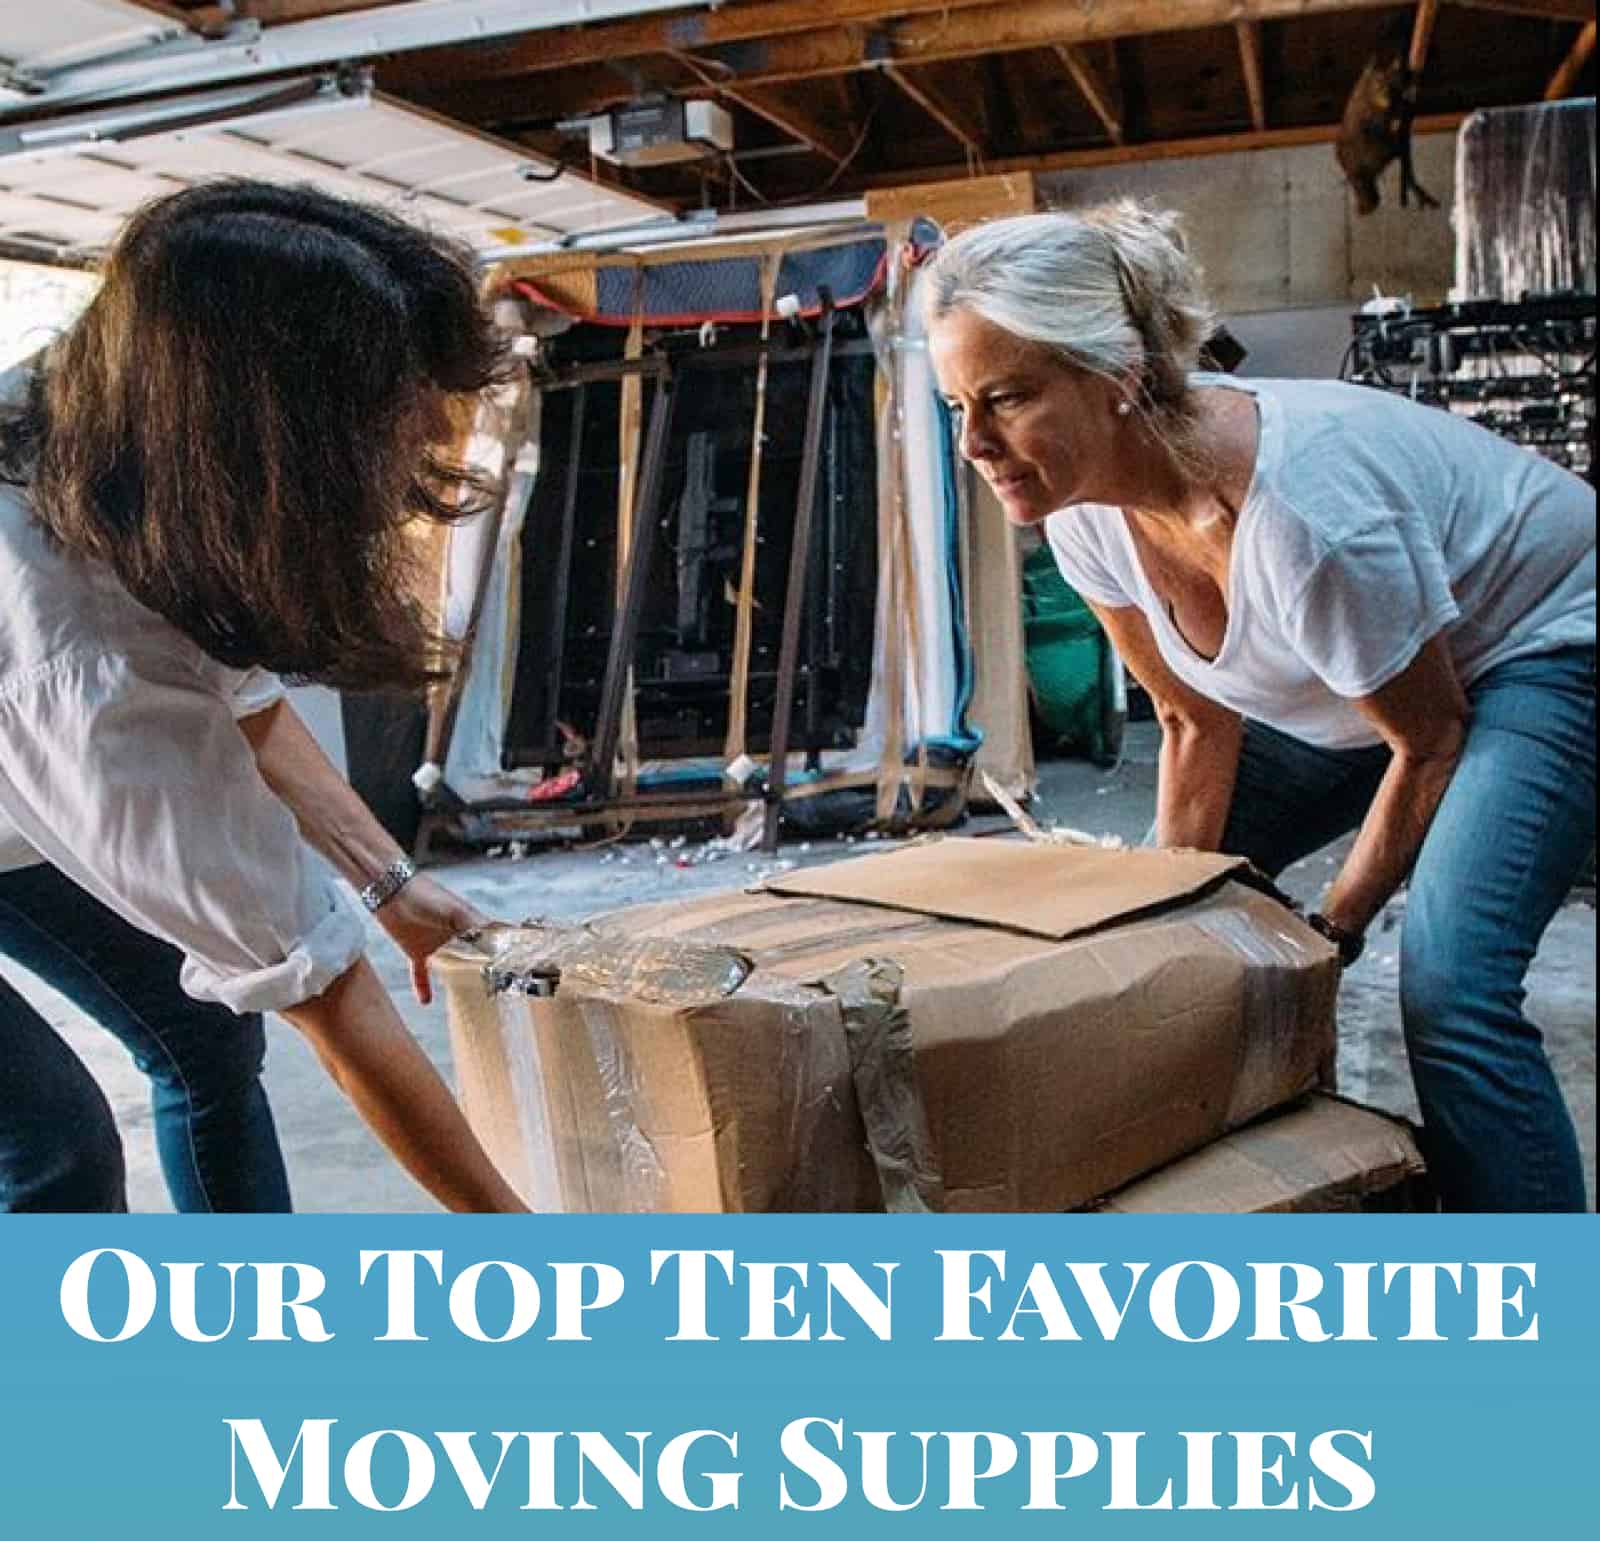 Our Top Ten Favorite Moving Supplies, Ann and Macky, boxes